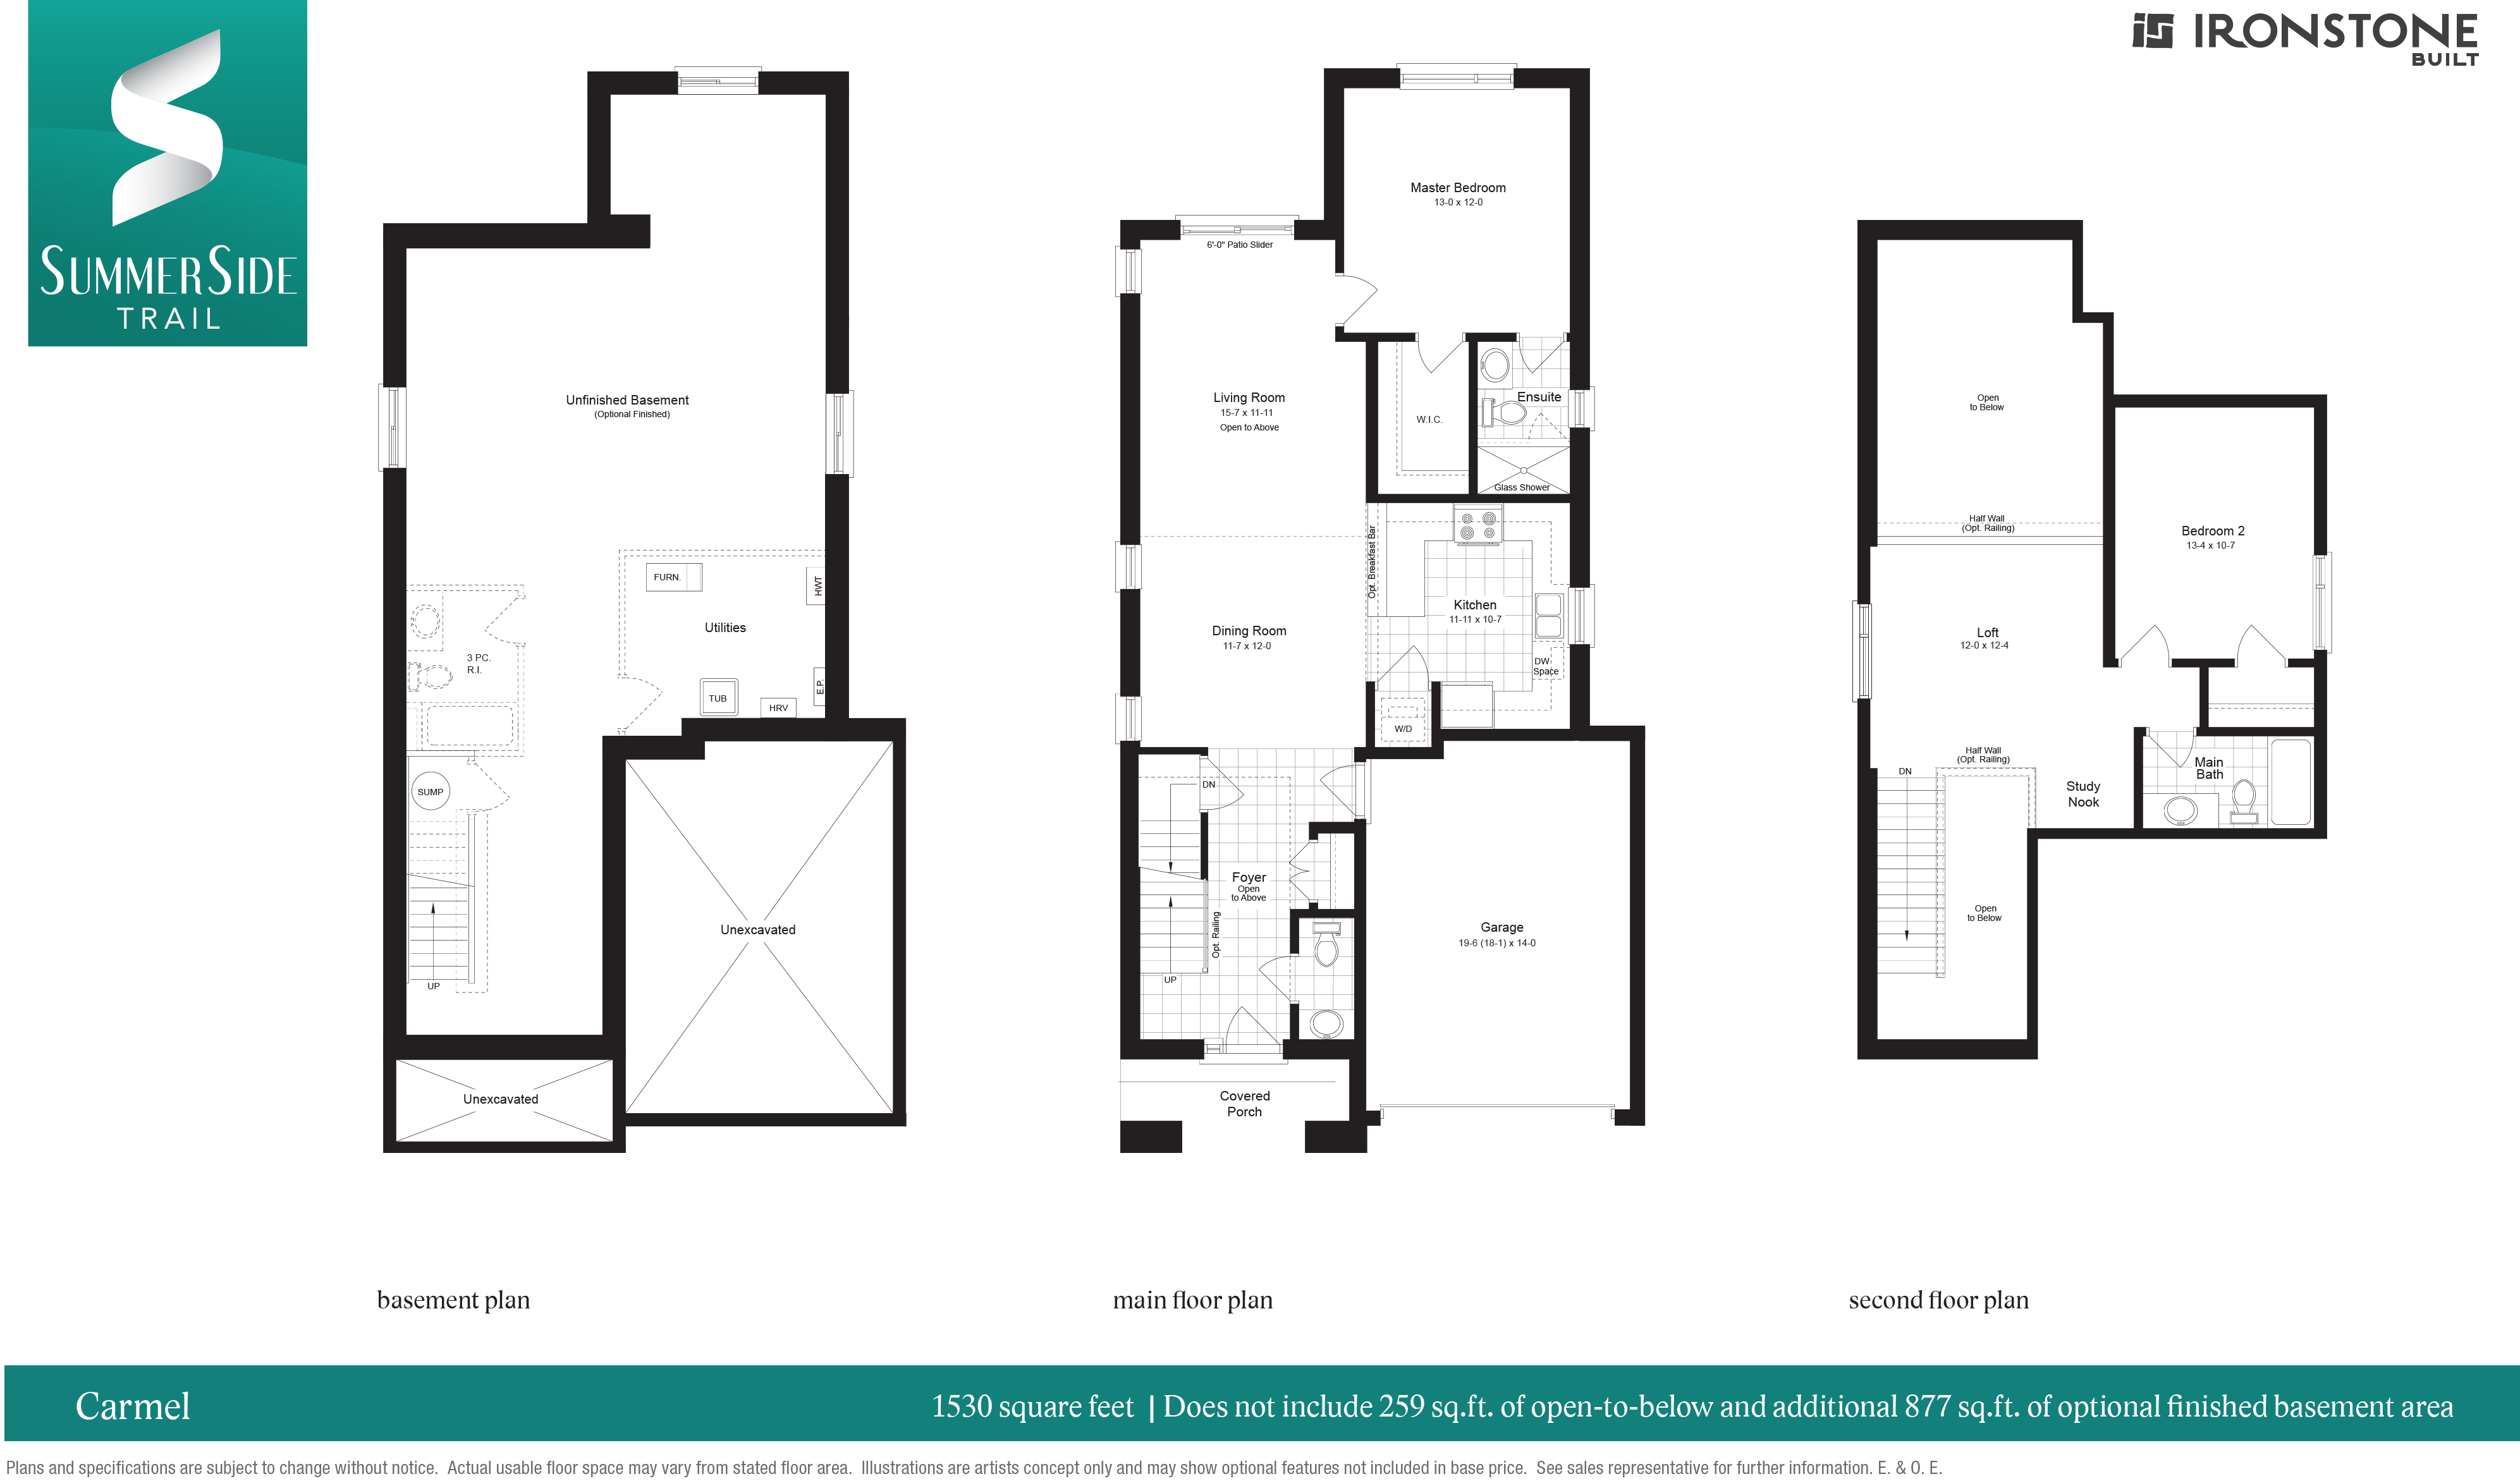 Carmel Floor Plan of Summerside Trail with undefined beds